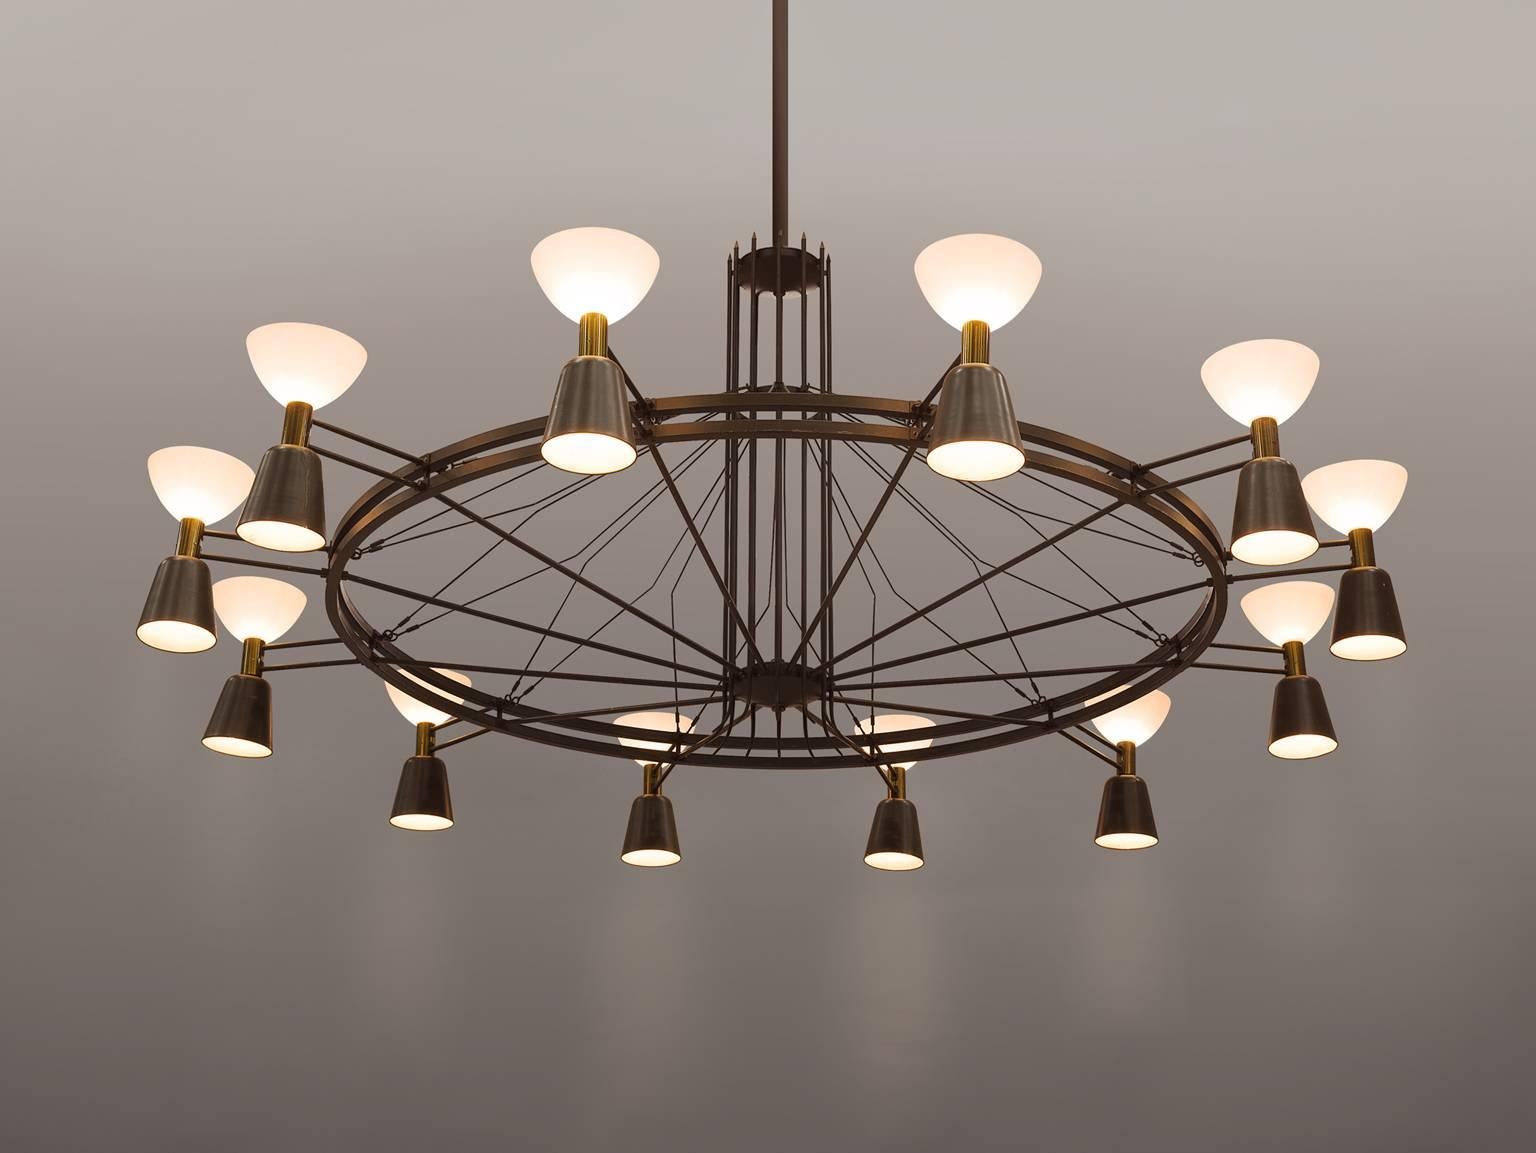 Chandelier, metal, glass The Netherlands, circa 1950.

This large Dutch chandelier is made in the 1950s by a local designer in the Eastern region of the Netherlands. The chandelier features twelve shades that shine both upwards and downwards. The